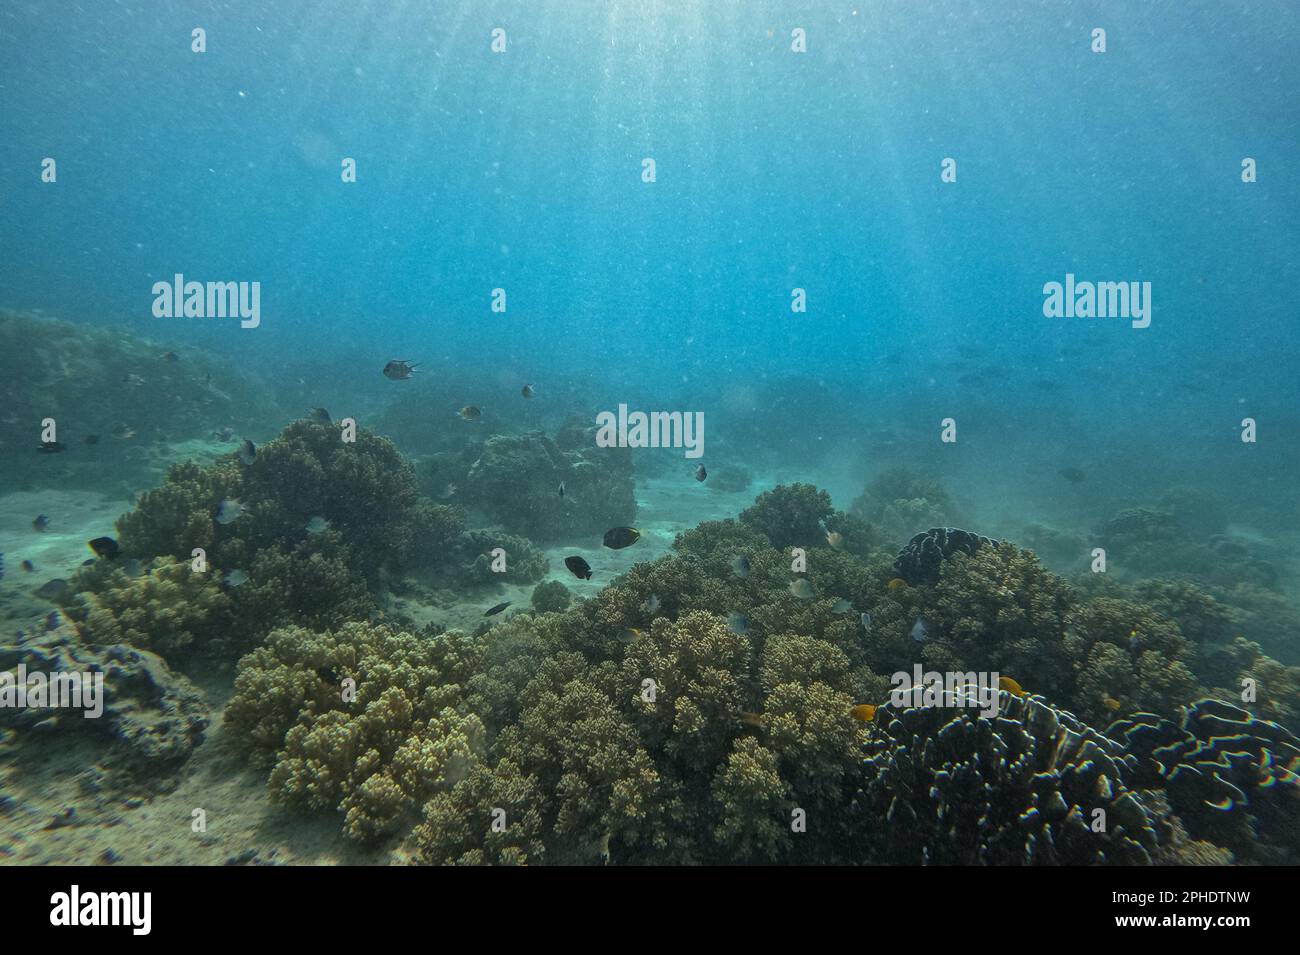 Idyllic shot of a coral reef in Siquijor, Philippines surrounded with fishes. Stock Photo